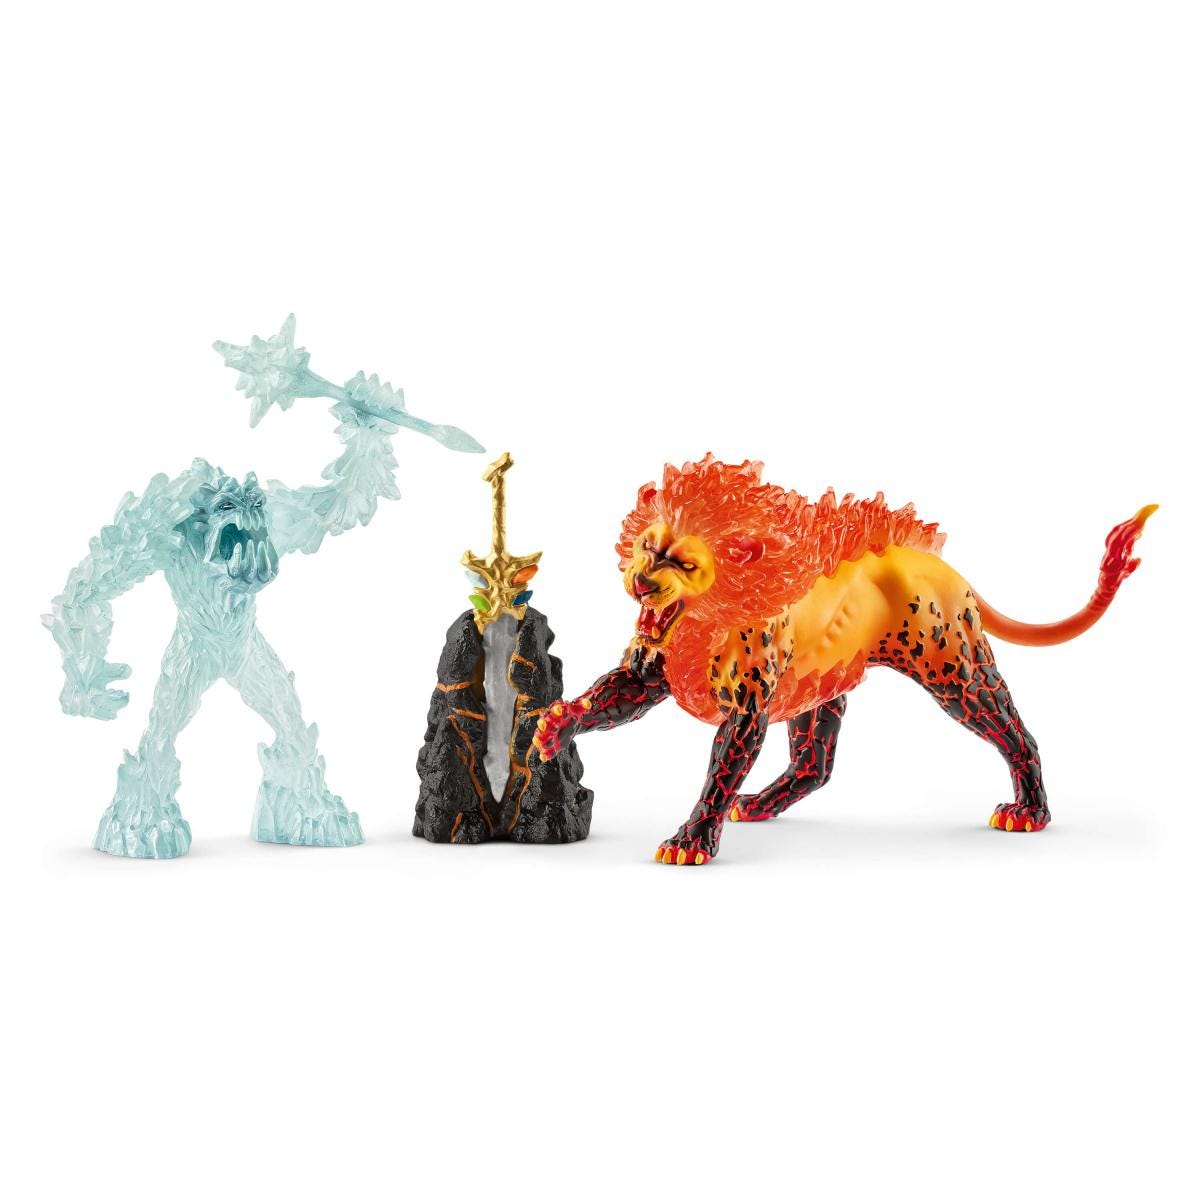 Battle for the Superweapon - Frost Monster vs. Fire Lion